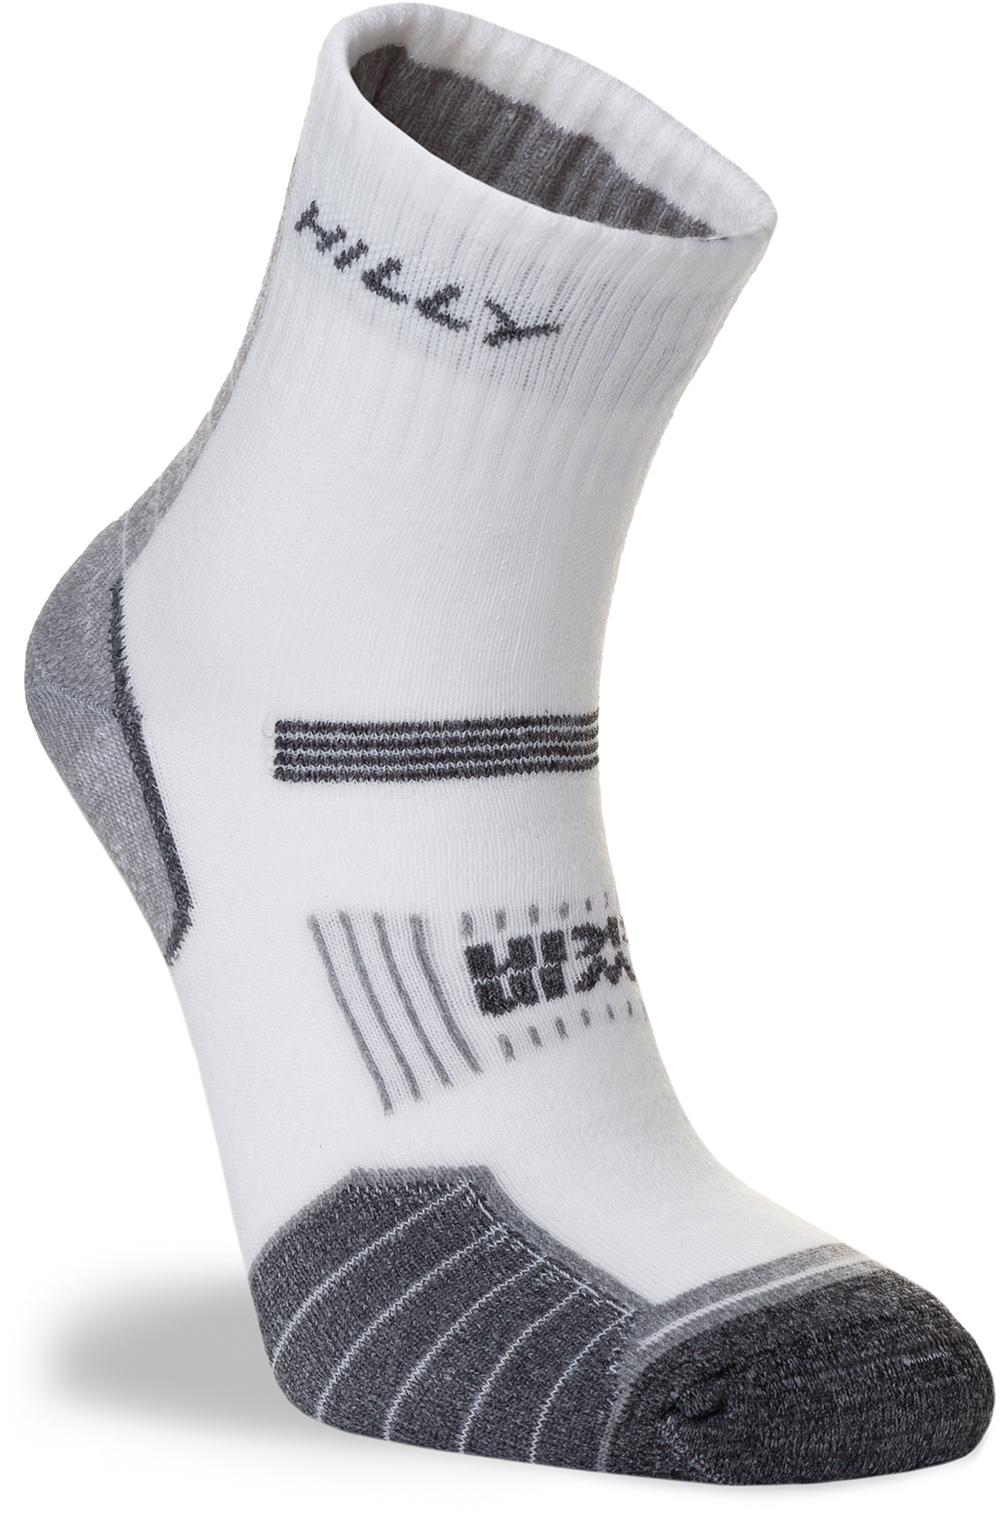 Hilly Twin Skin Anklet Sock - White/grey Marl